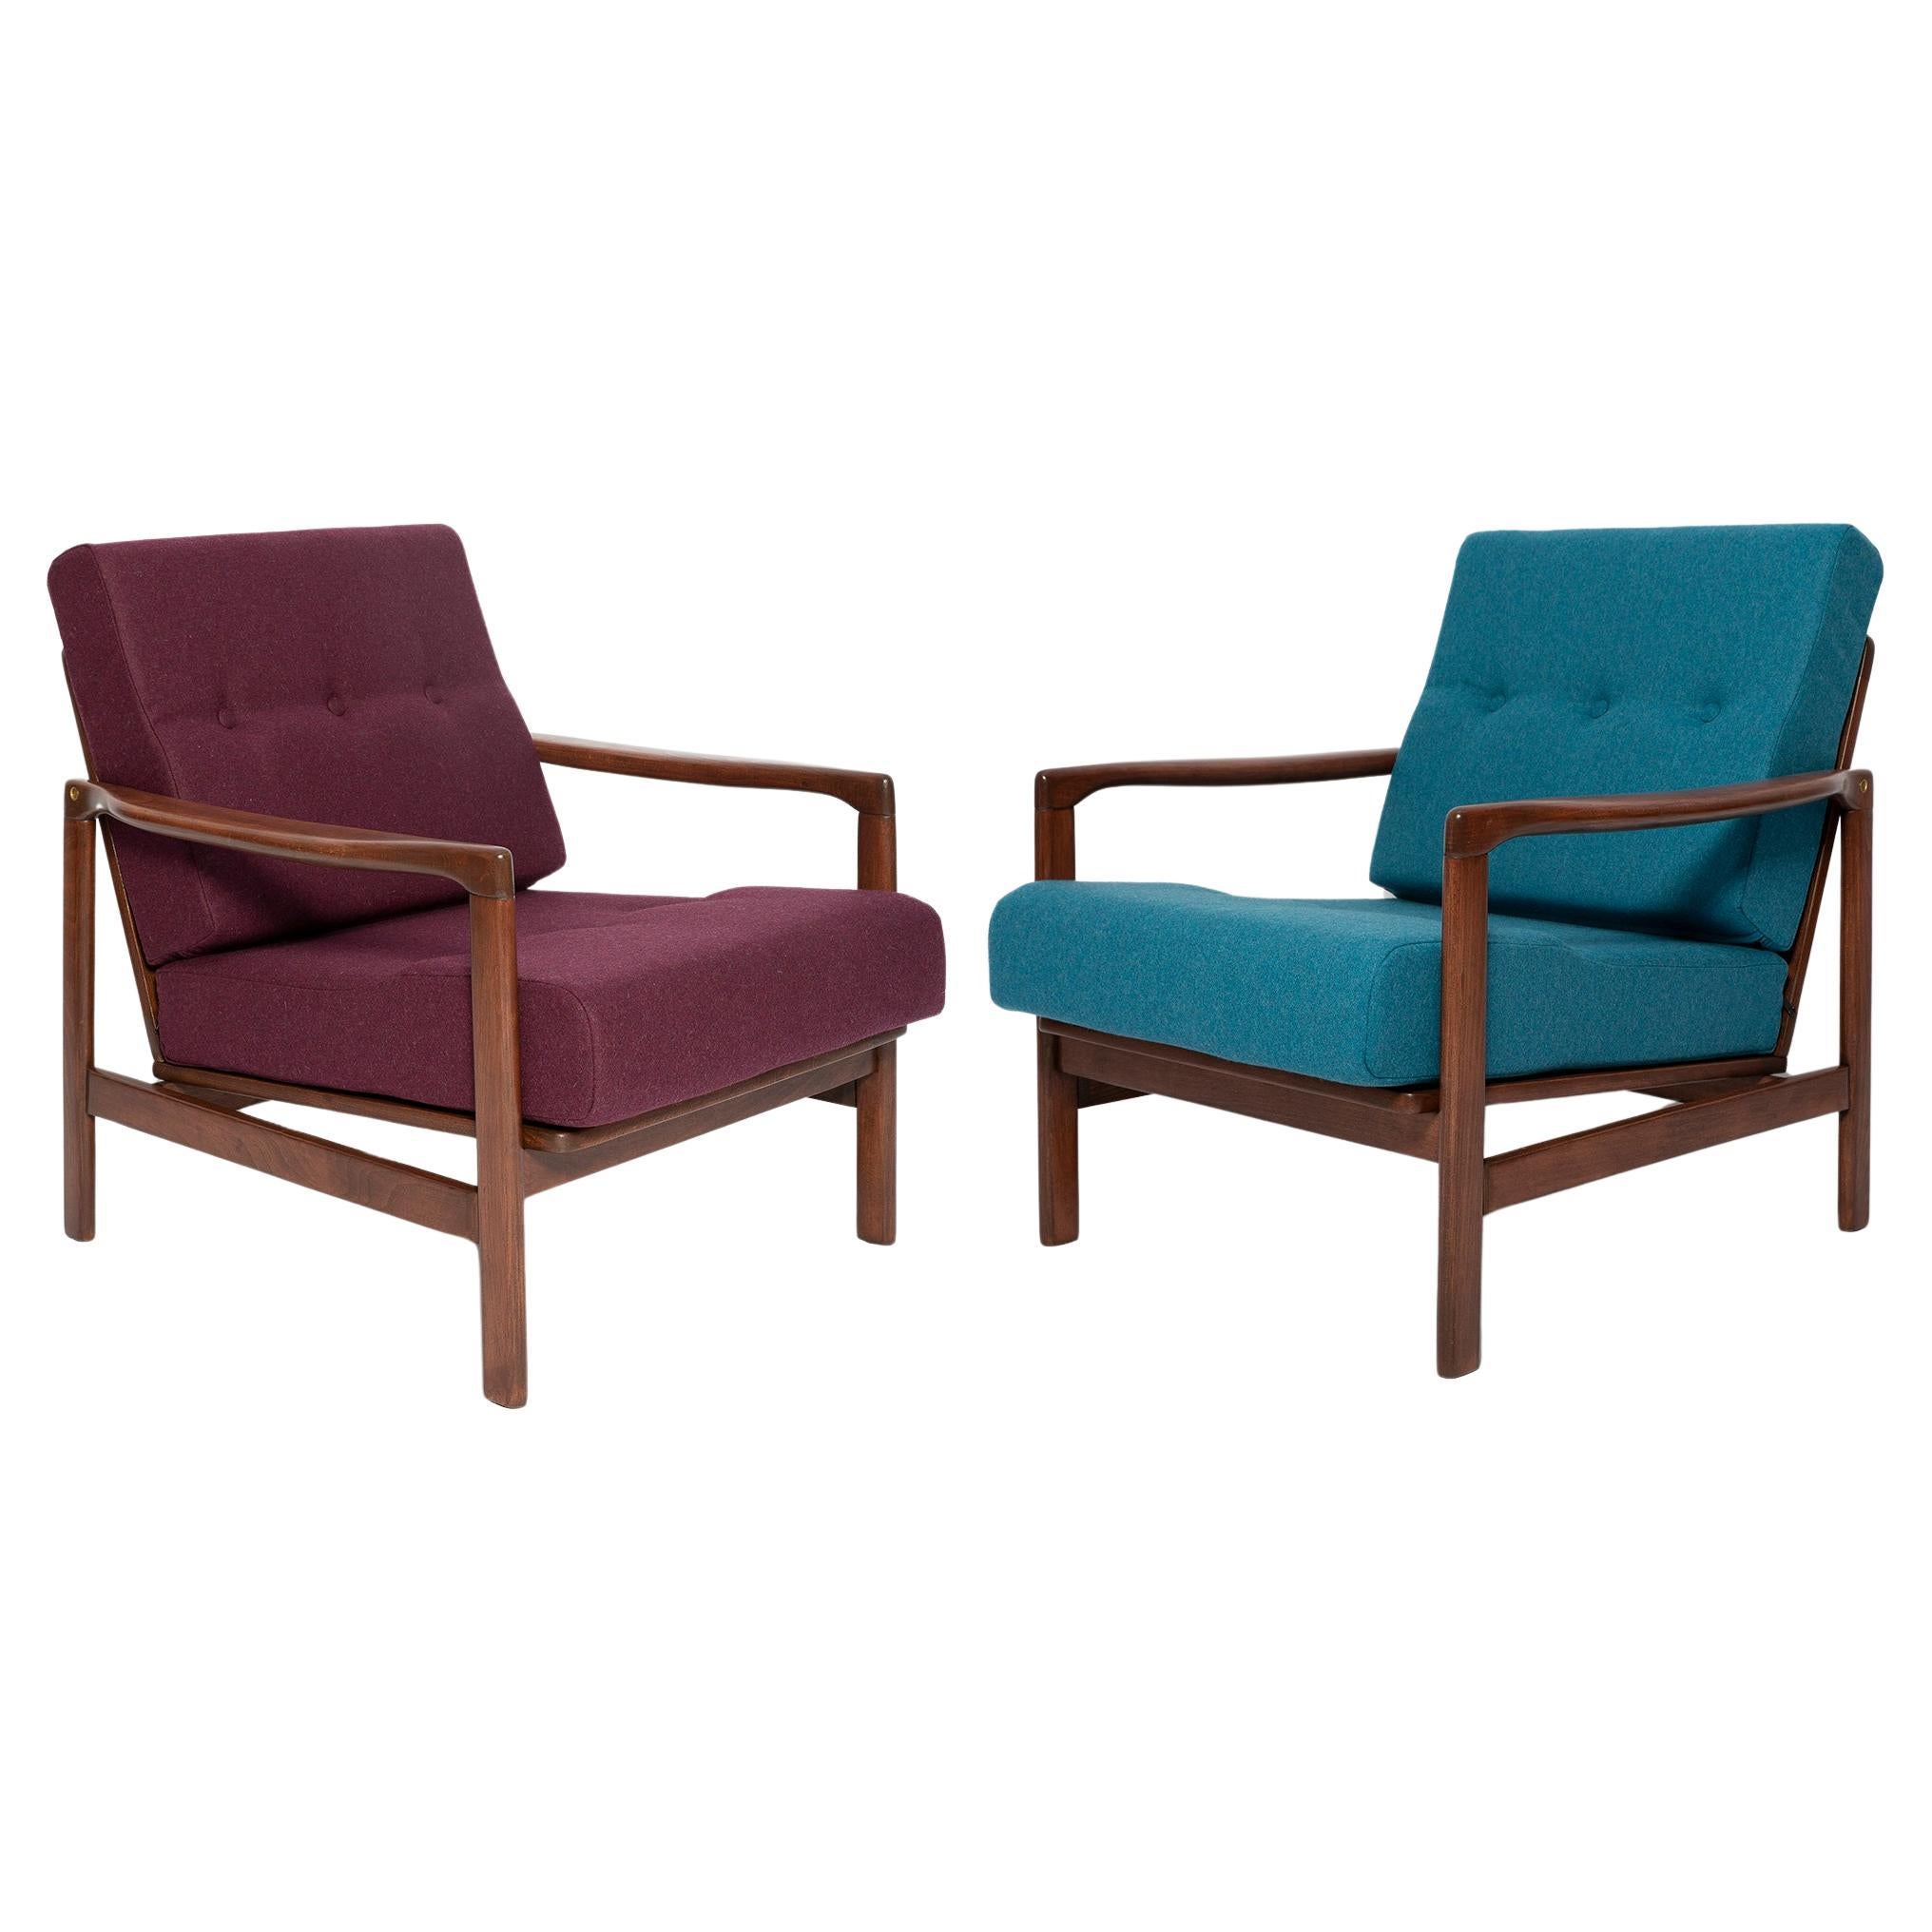 Pair of Mid Century Purple and Blue Wool Armchairs, Zenon Baczyk, Poland, 1960s For Sale